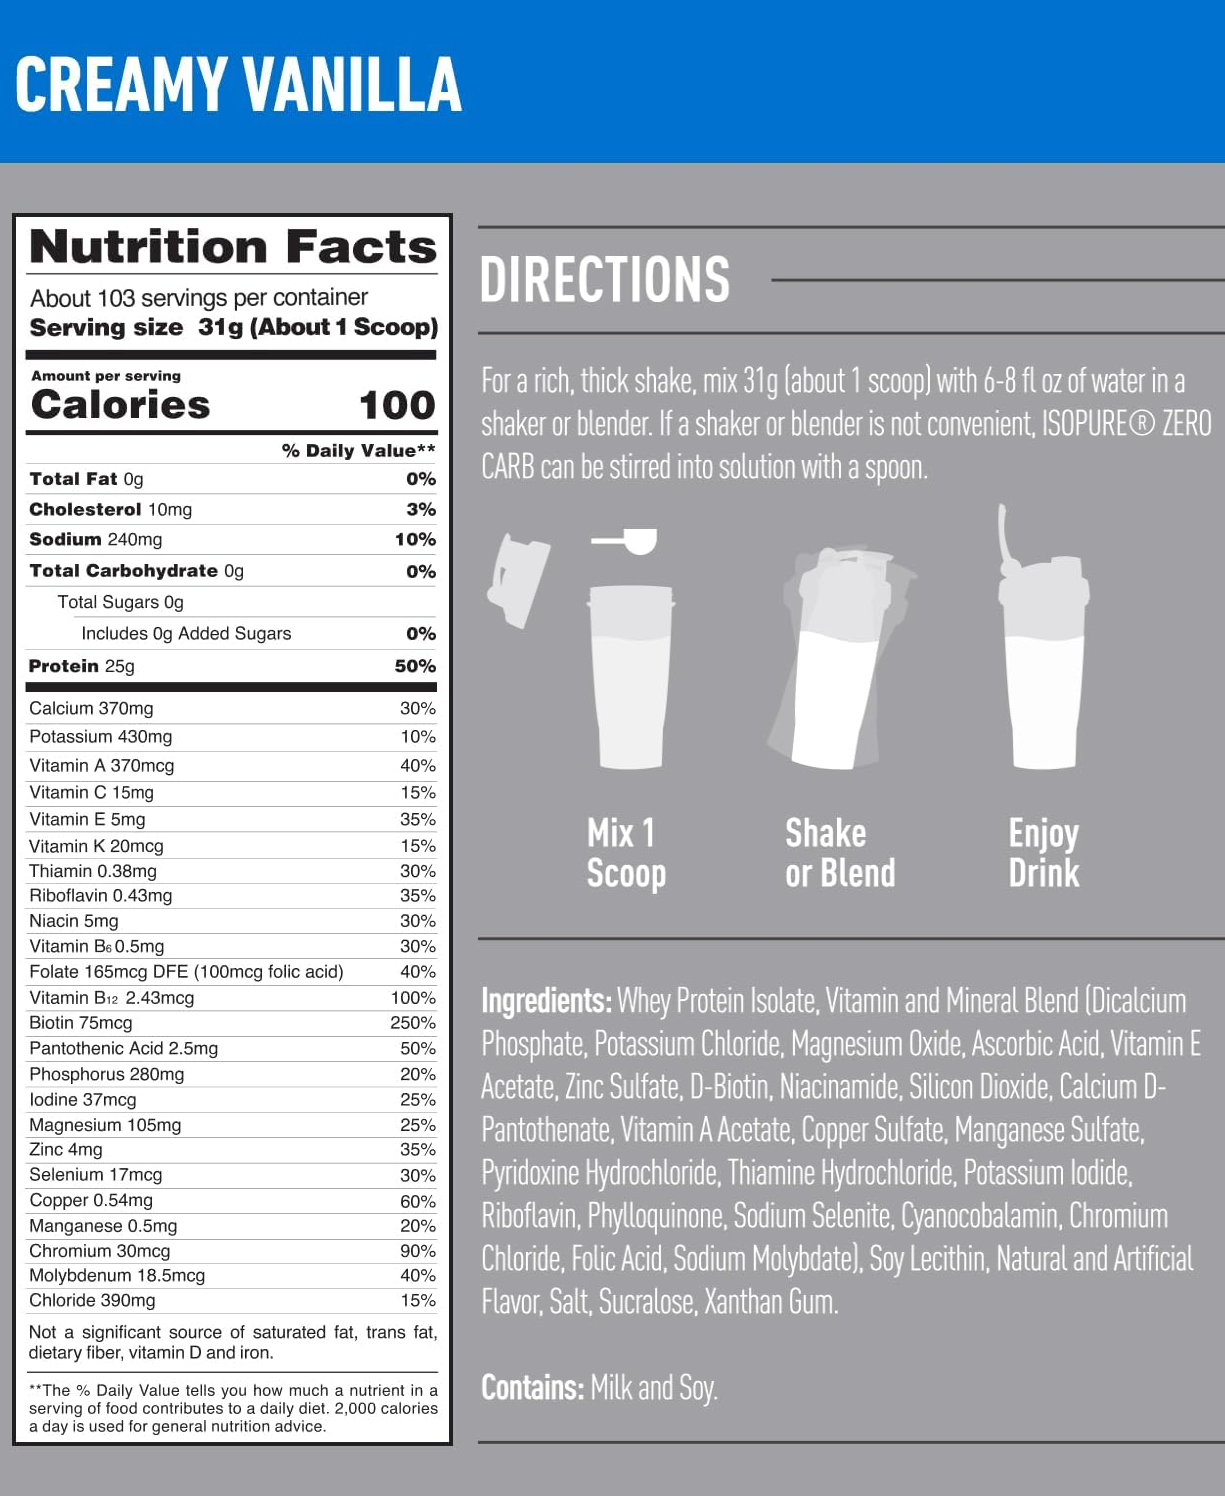 Nutrition facts of Creamy Vanilla, a rich protein shake with vitamins and minerals. Contains 25g protein, 240mg sodium, and 10mg cholesterol per serving.